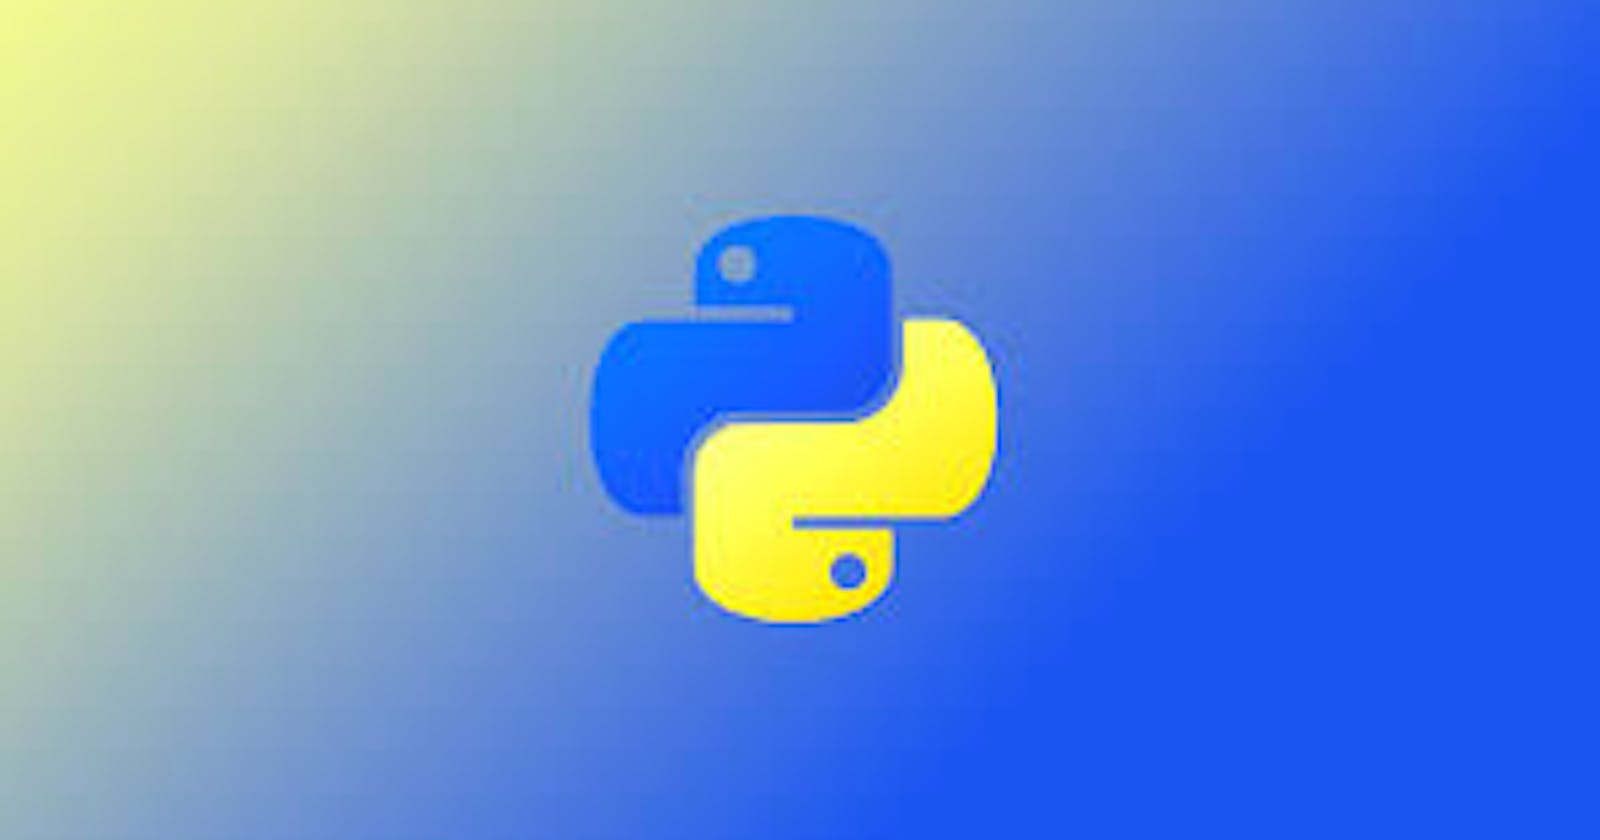 Best Resources To Learn Python As A Beginner